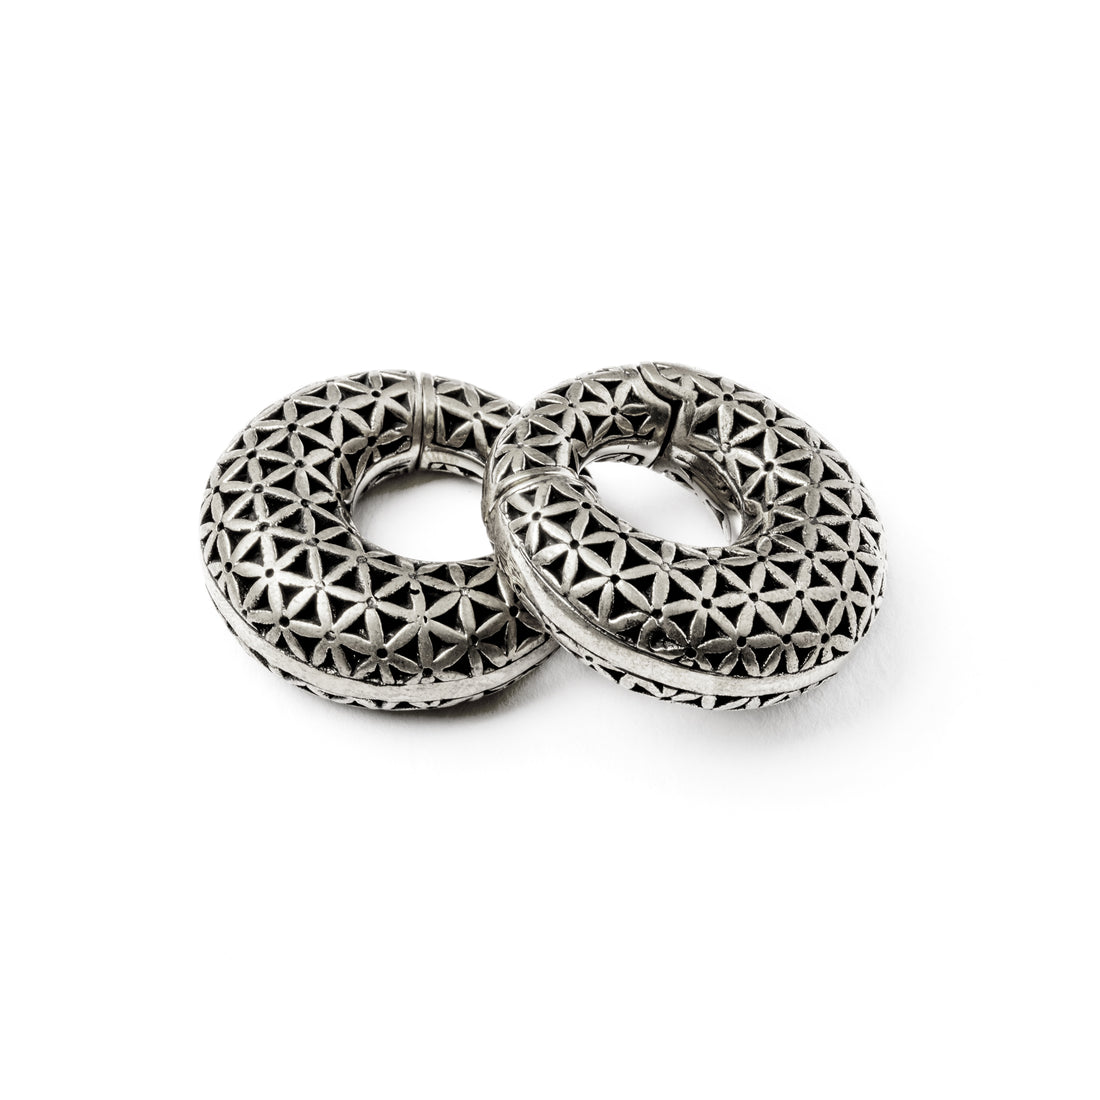 pair of silver brass ear weights hoops with flower of life pattern front and side view